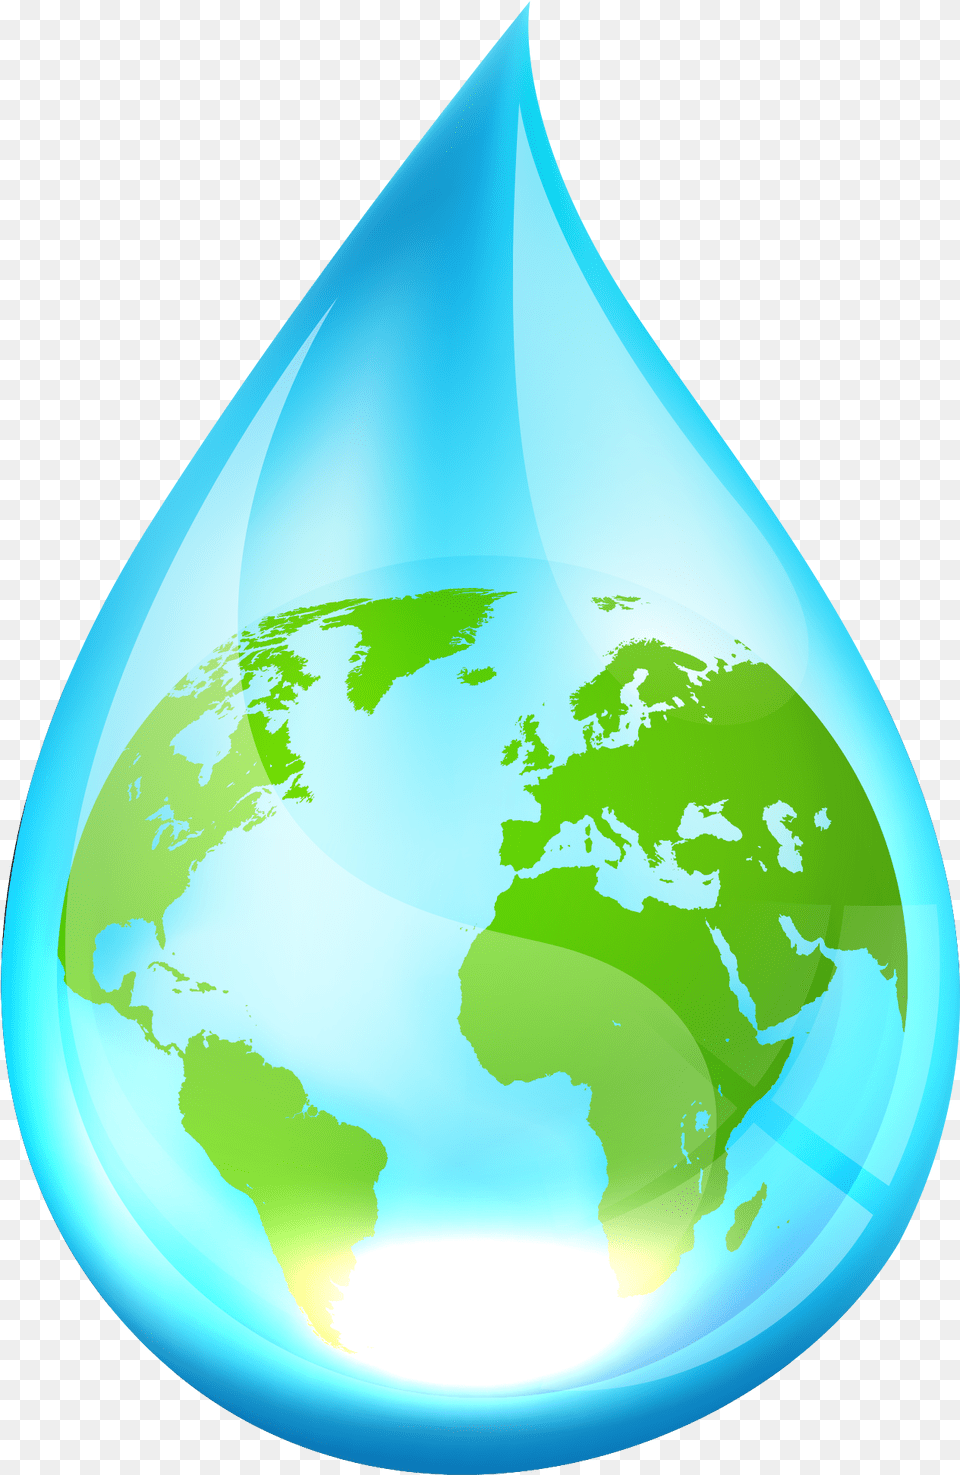 Water Droplet With World Download, Person, Astronomy, Outer Space Png Image